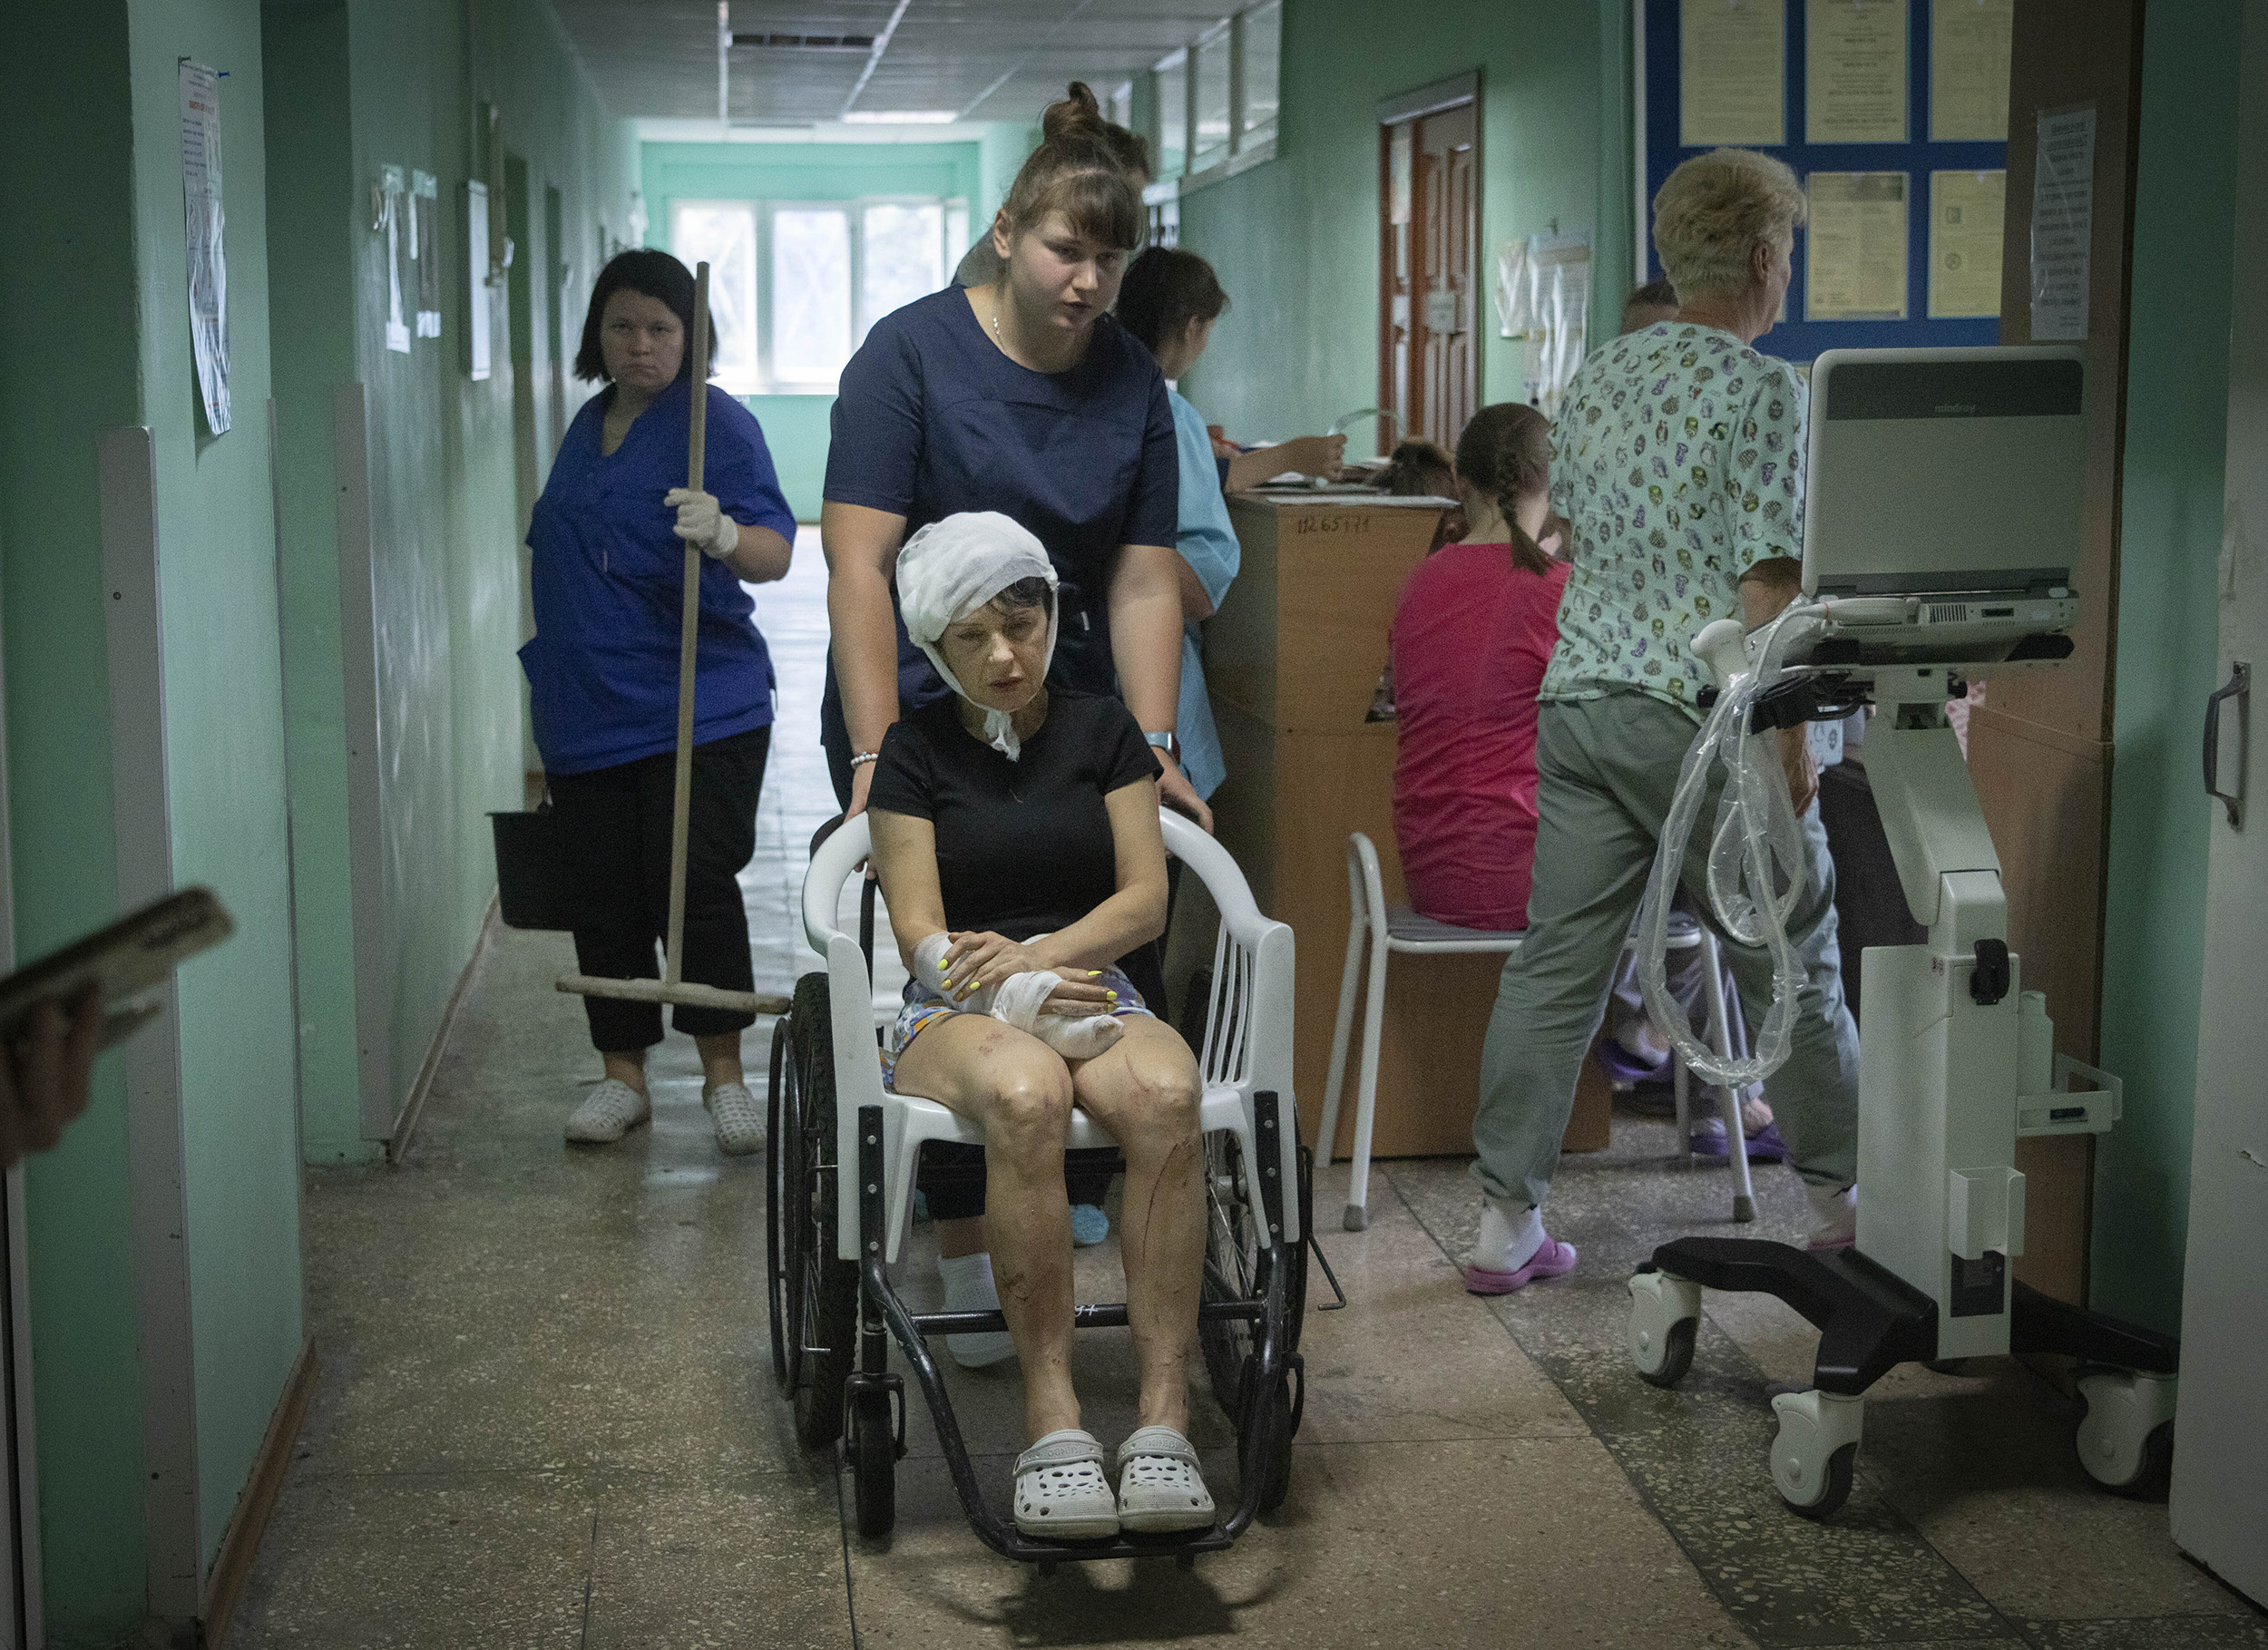 A hospital nurse pushes a wheelchair containing a woman injured by the Russian missile attack on a shopping center in Ukraine's Kremenchuk on June 28.